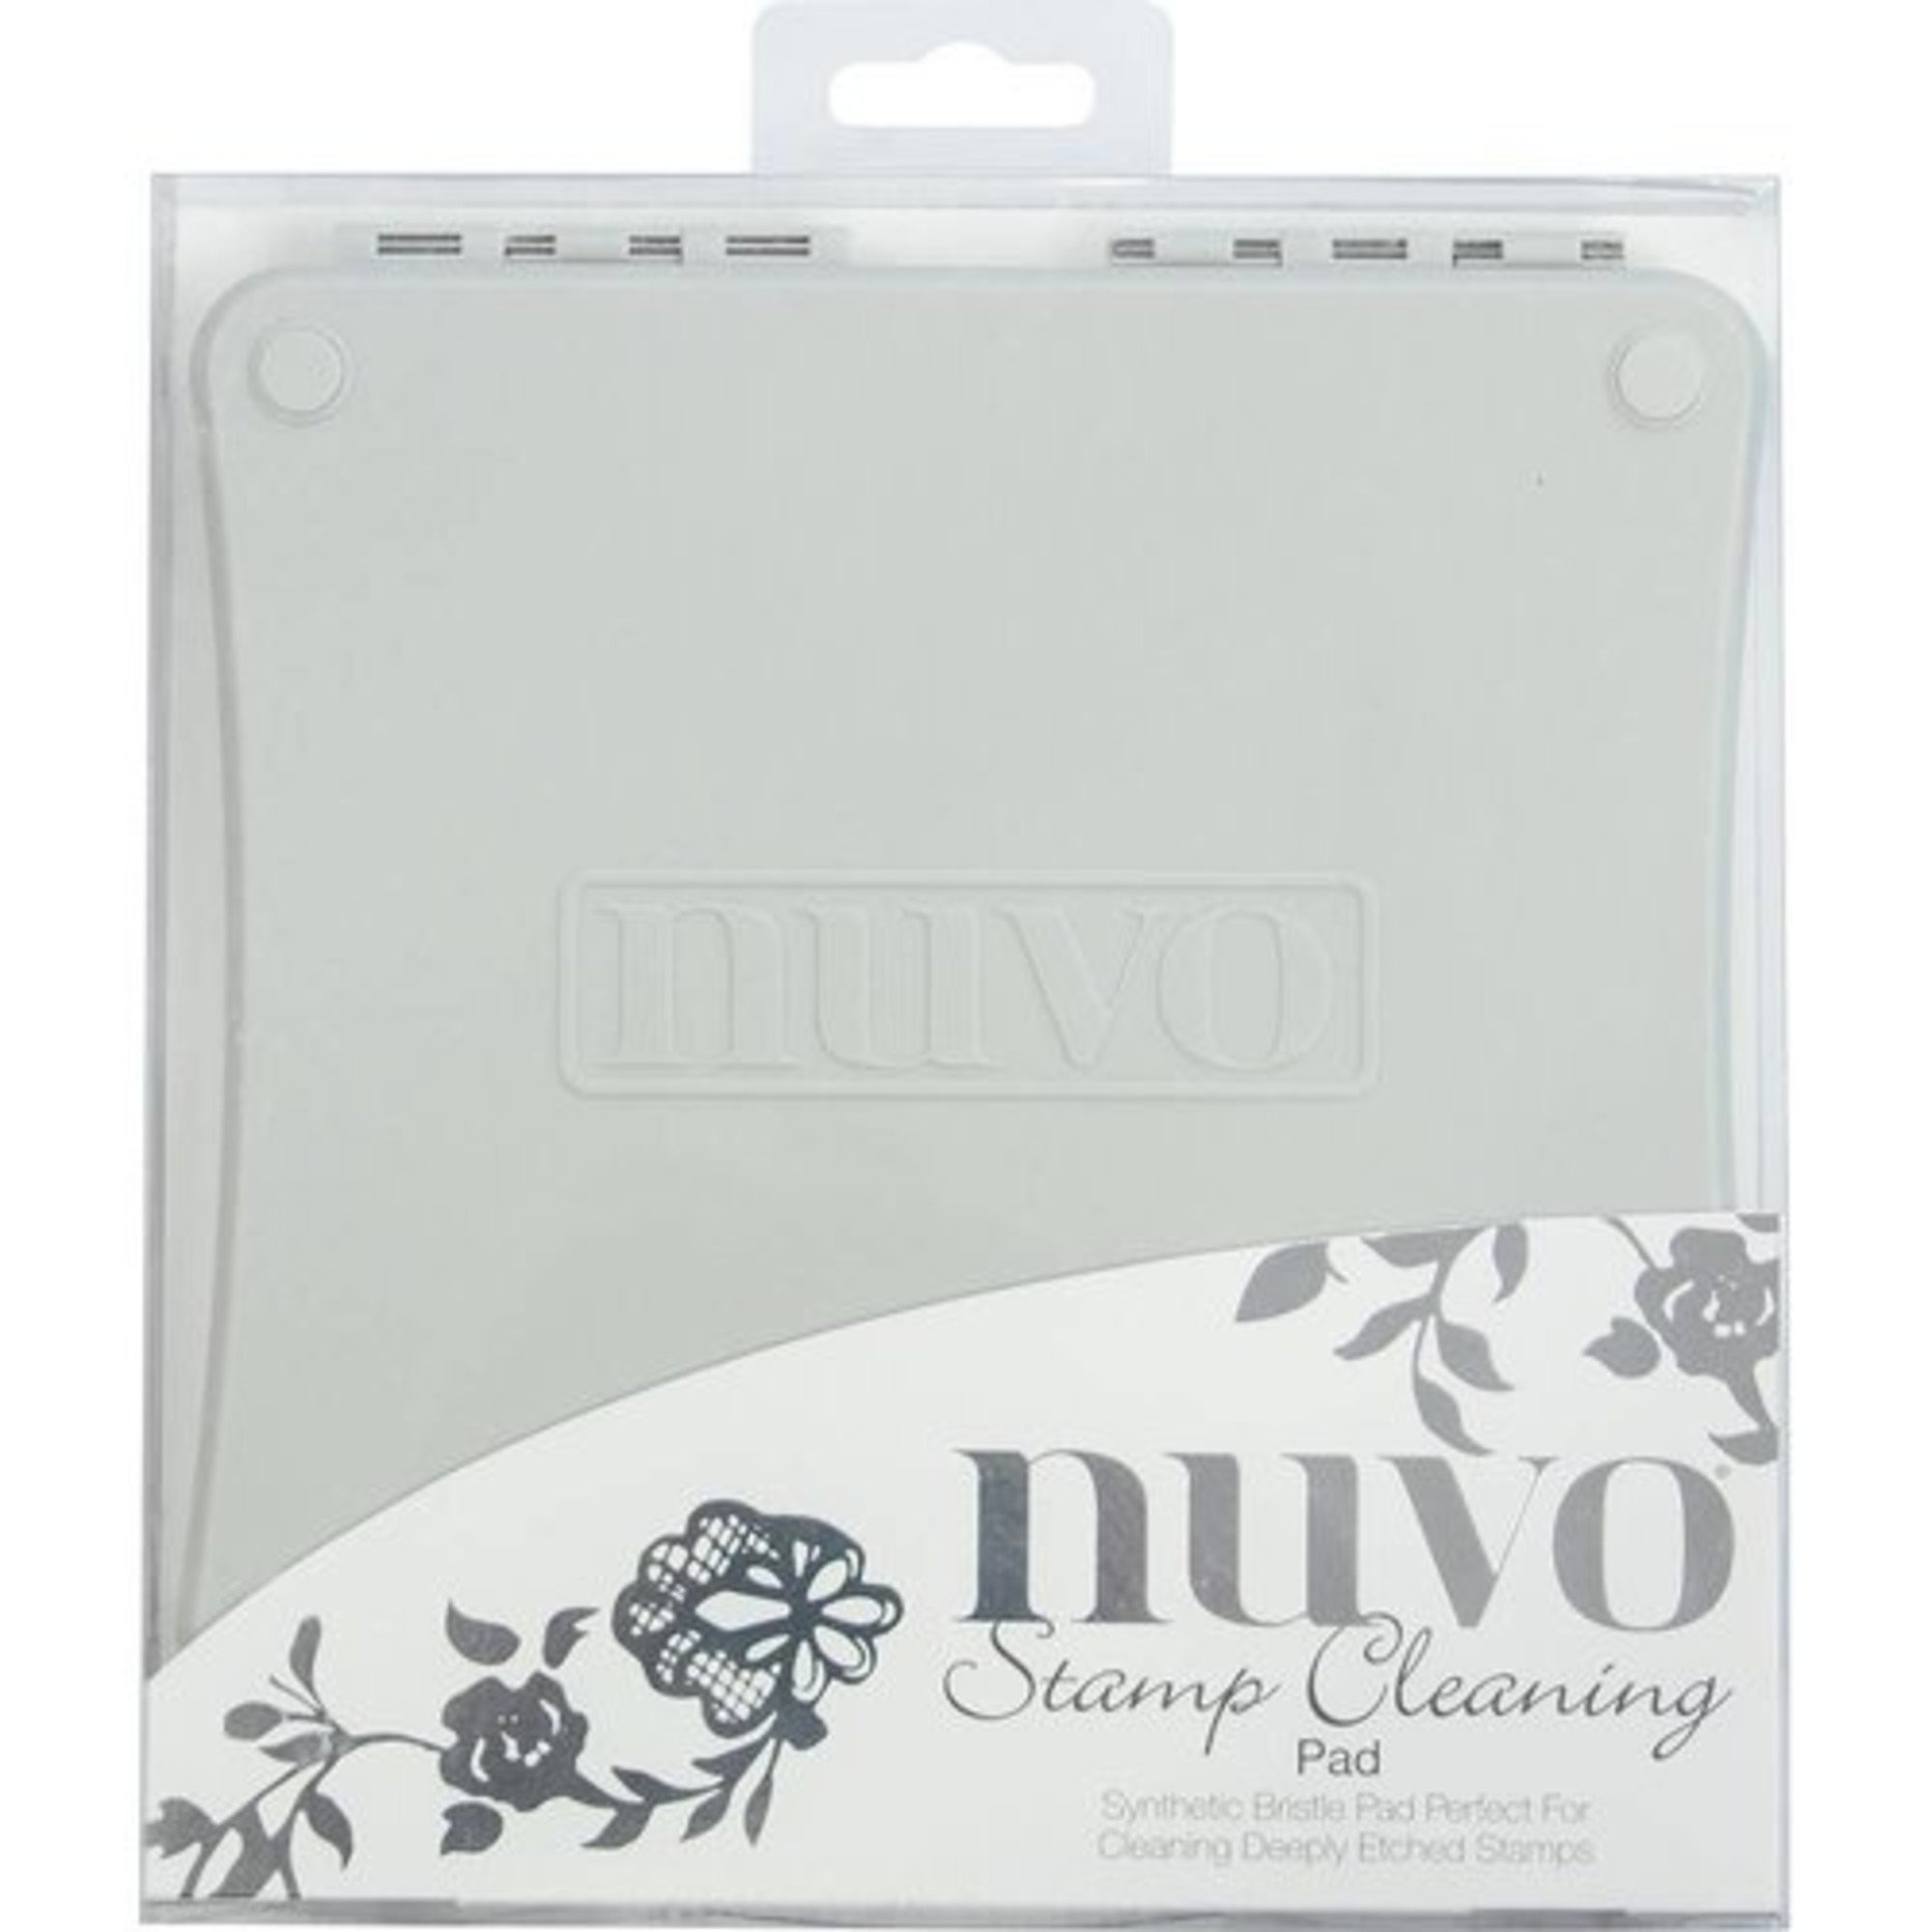 Nuvo Stamp Cleaning Pad 19x19cm